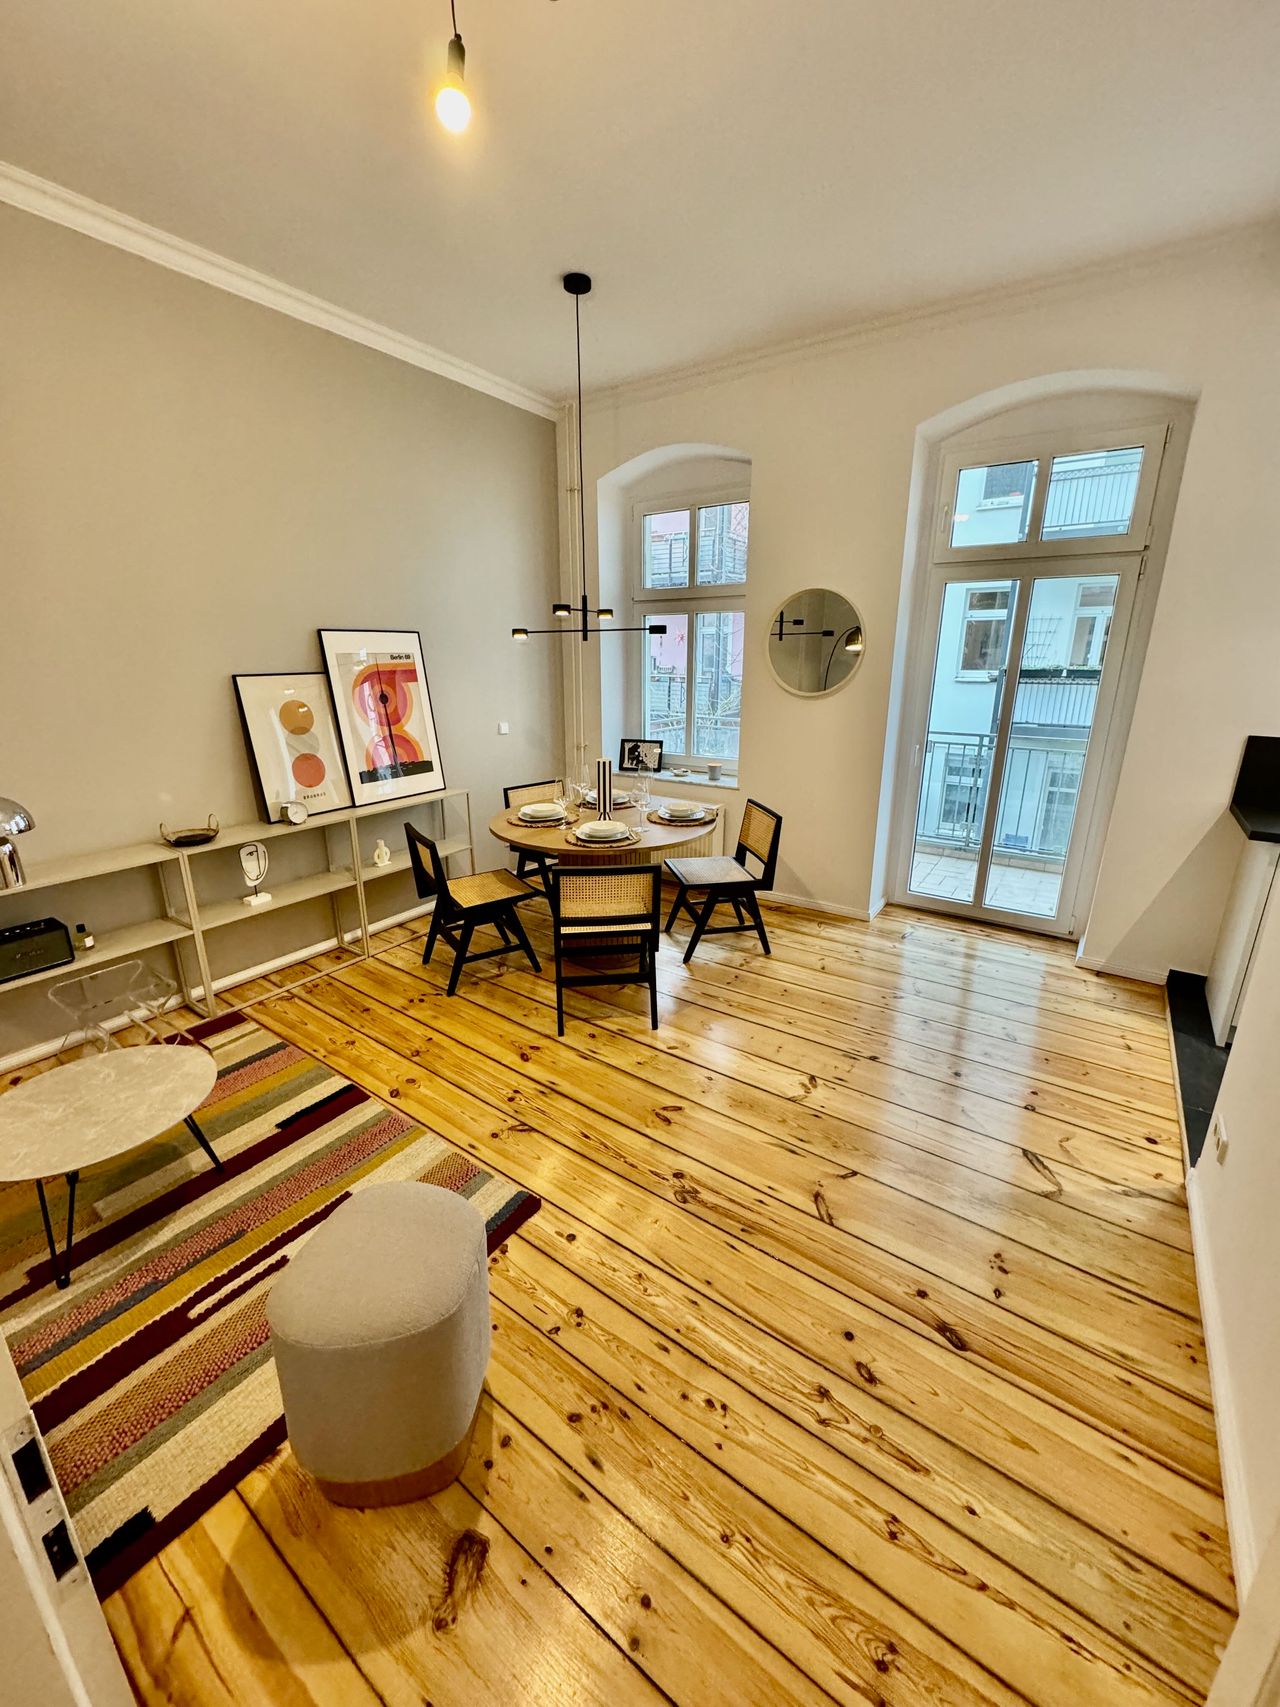 Cozy & lovely apartment located in Friedrichshain